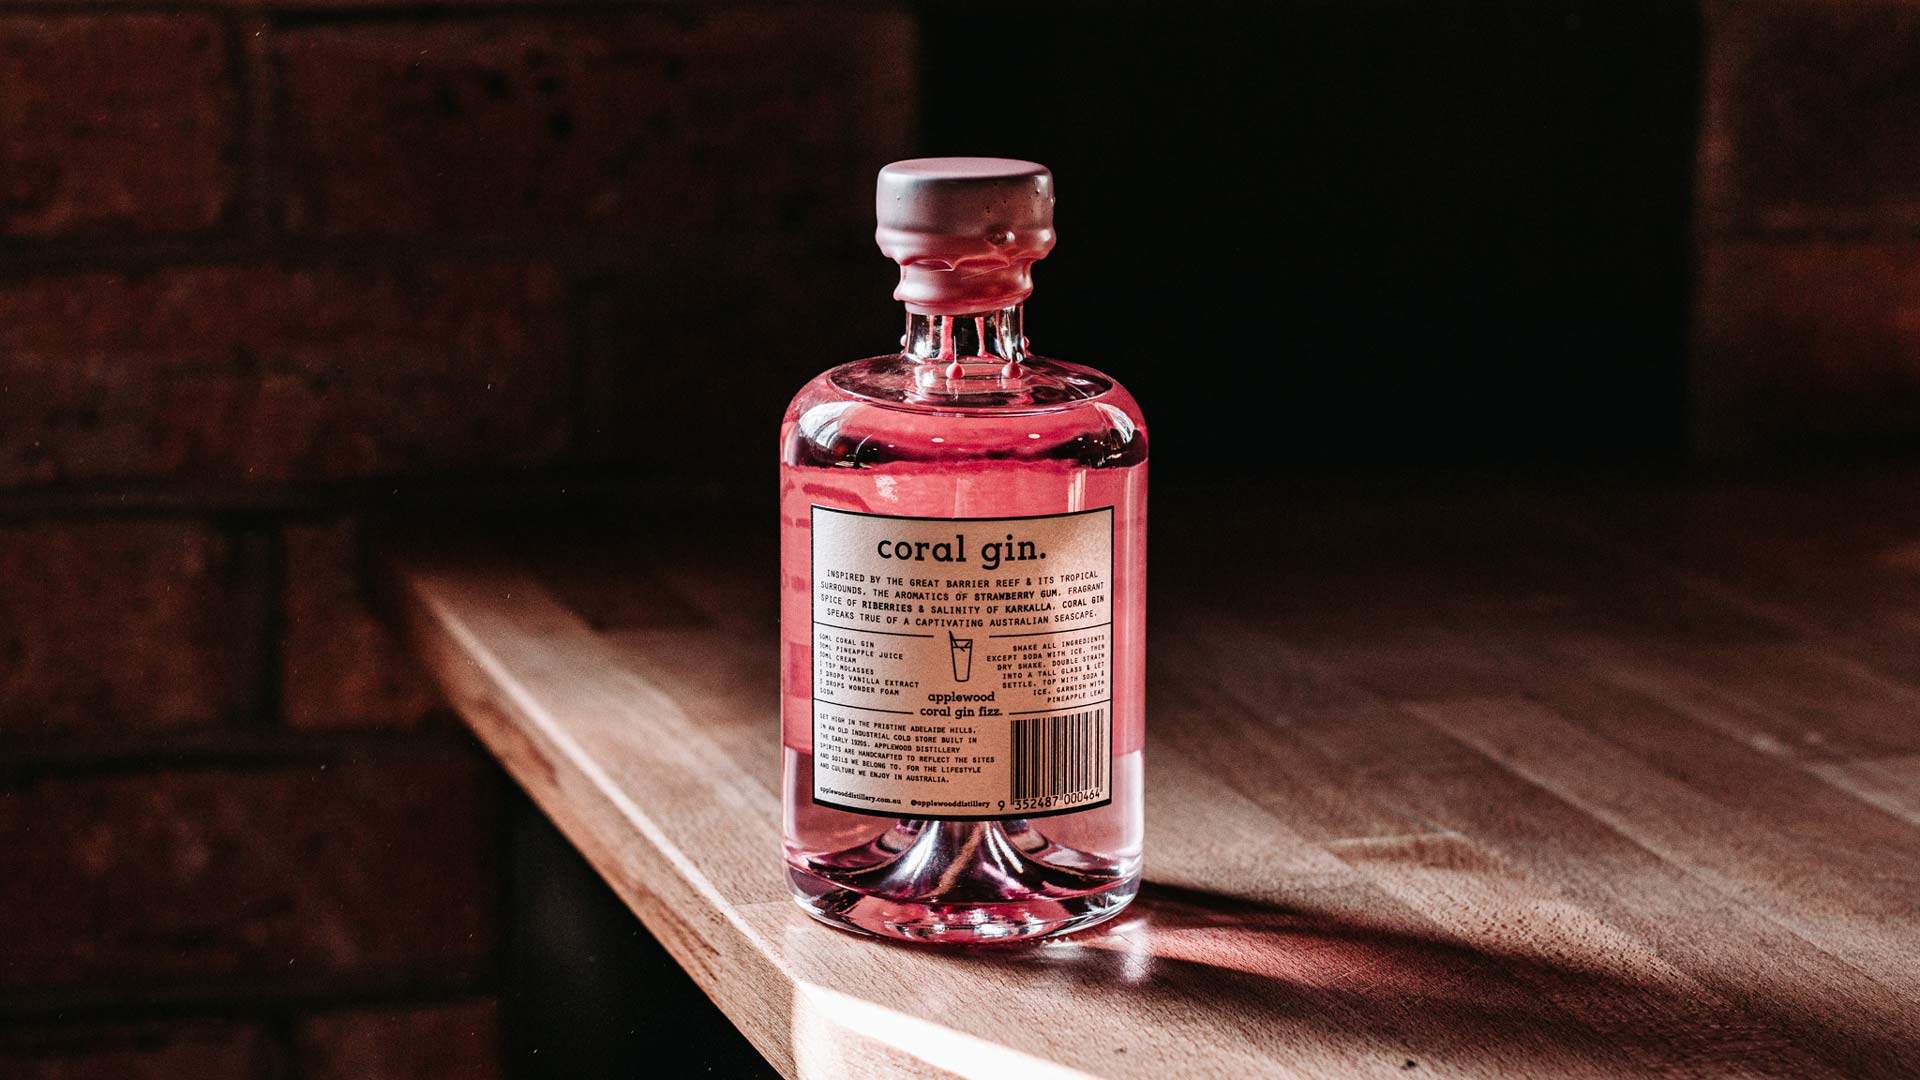 Applewood Distillery Has Just Released a New Coral Pink Gin Made with Native Australian Botanicals